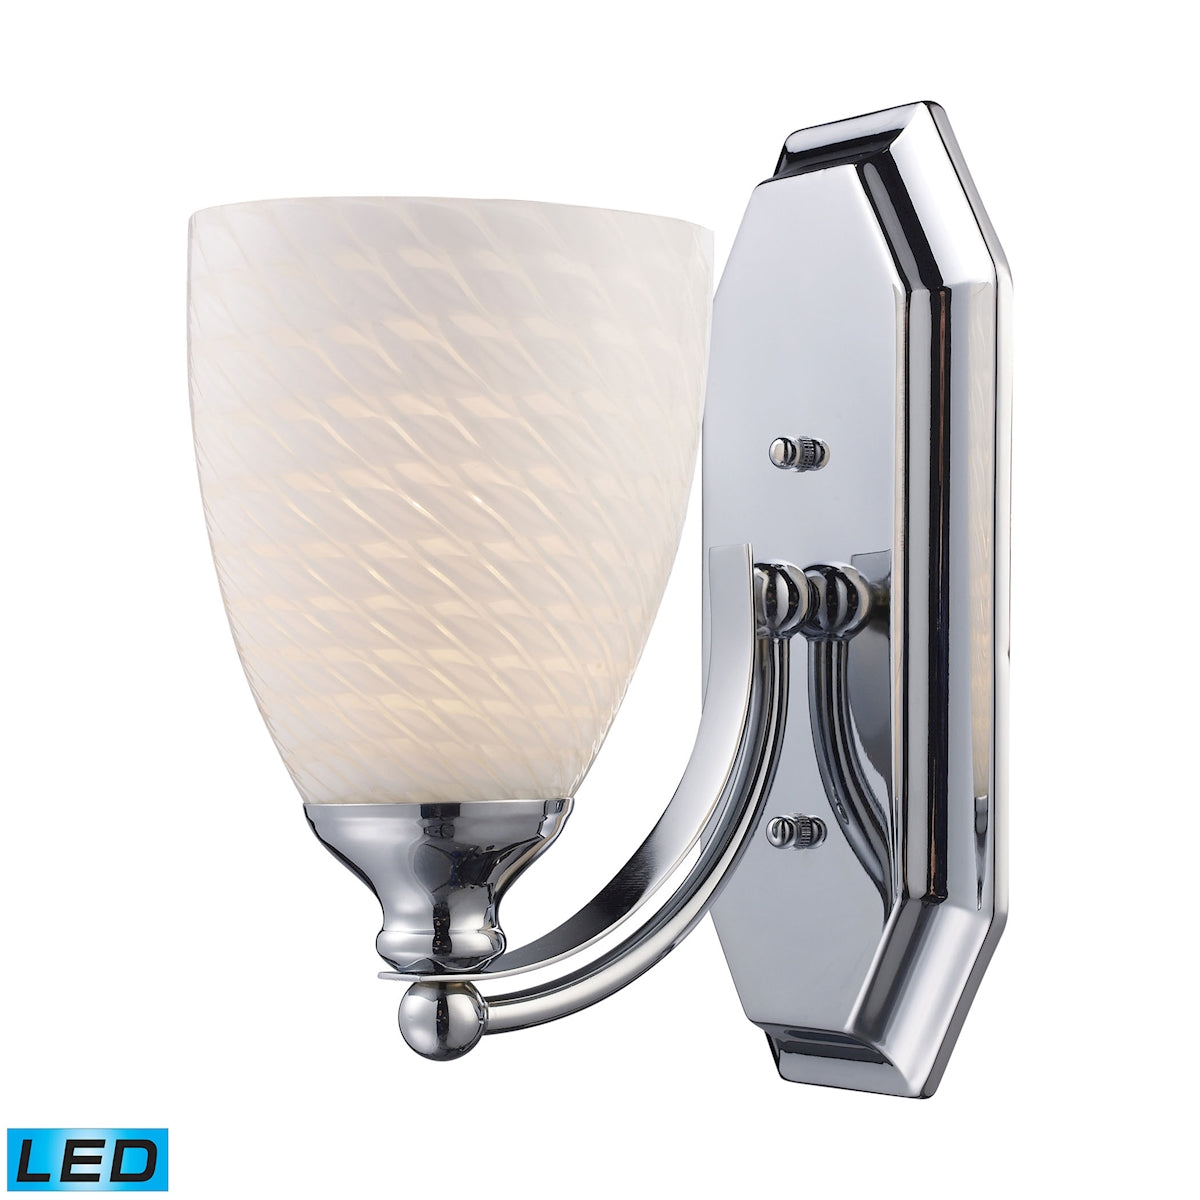 ELK Lighting 570-1C-WS-LED Mix and Match Vanity 1-Light Wall Lamp in Chrome with White Swirl Glass - Includes LED Bulb